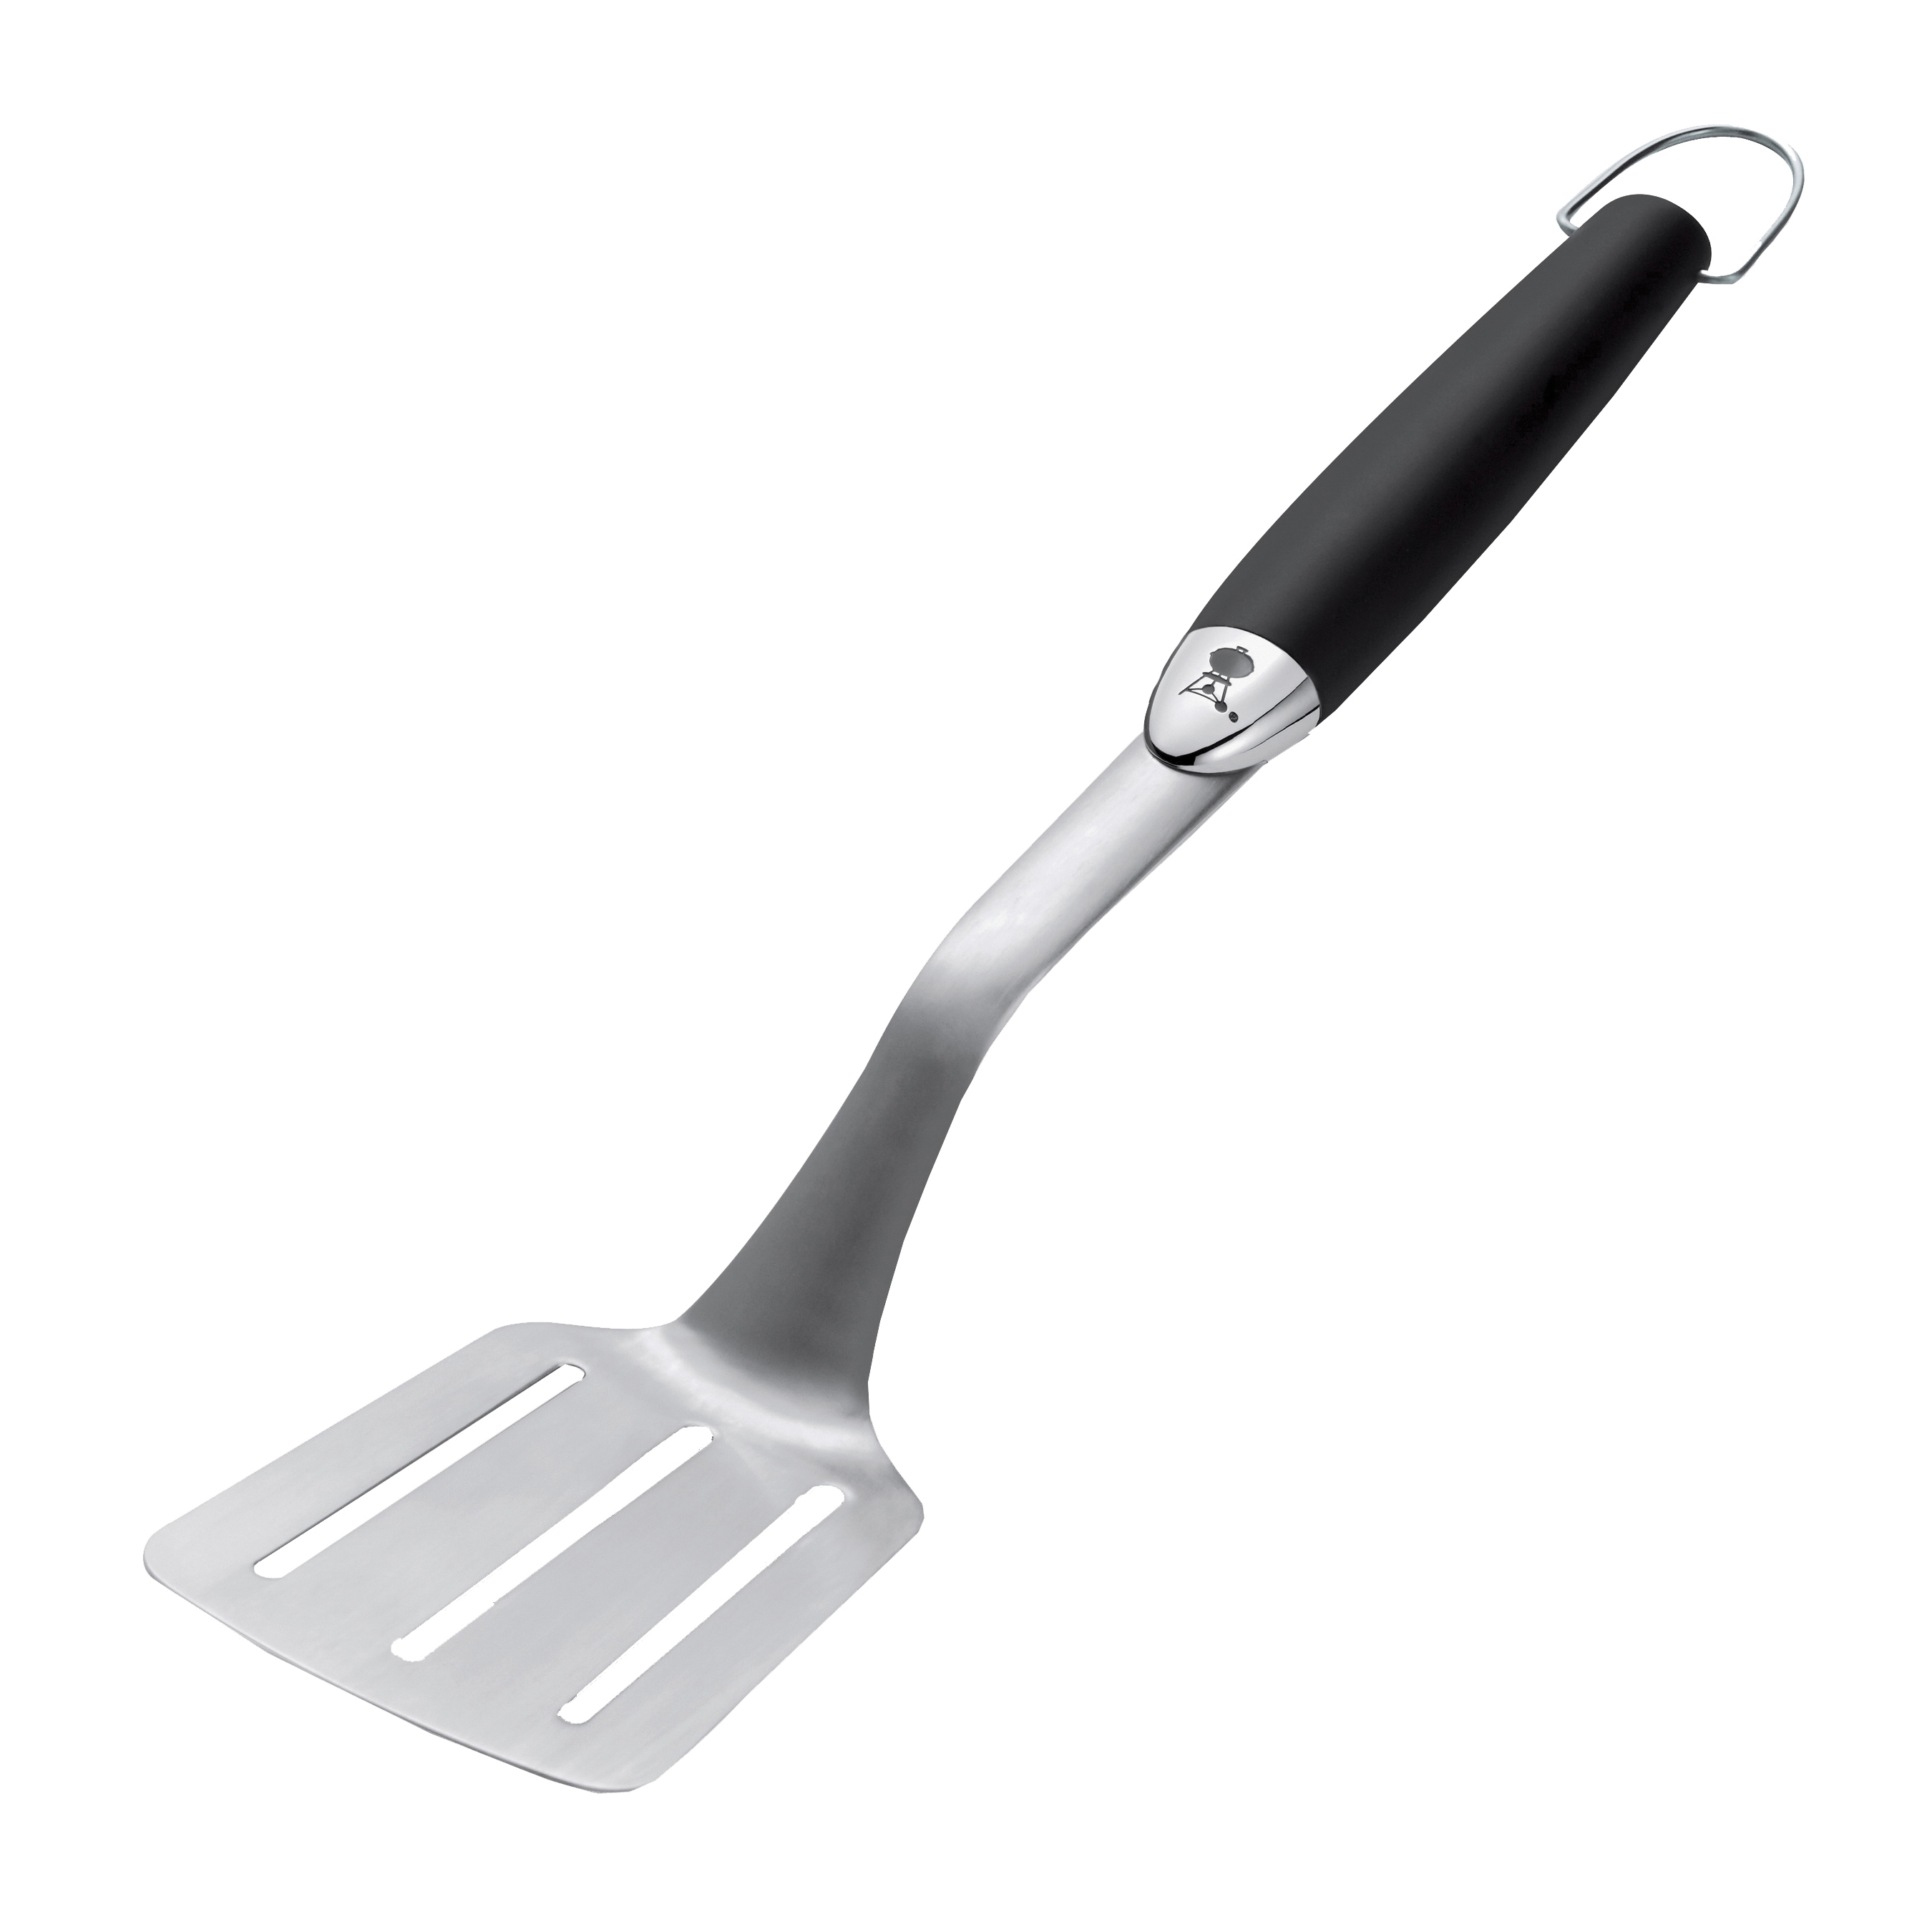 GrillPro 40269 20 Giant Stainless Steel Tongs